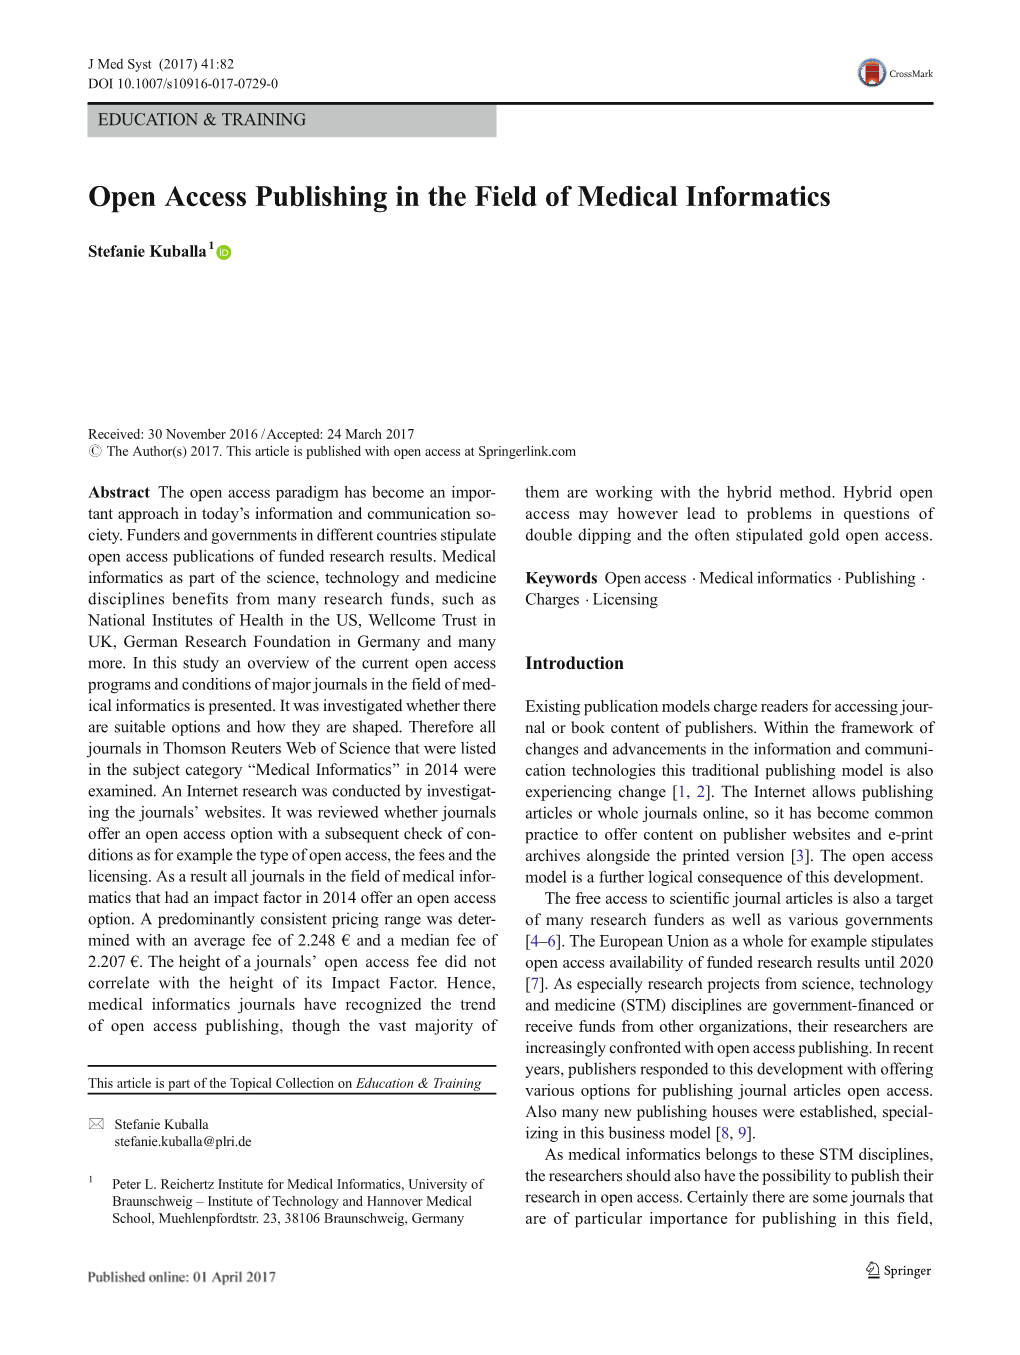 Open Access Publishing in the Field of Medical Informatics